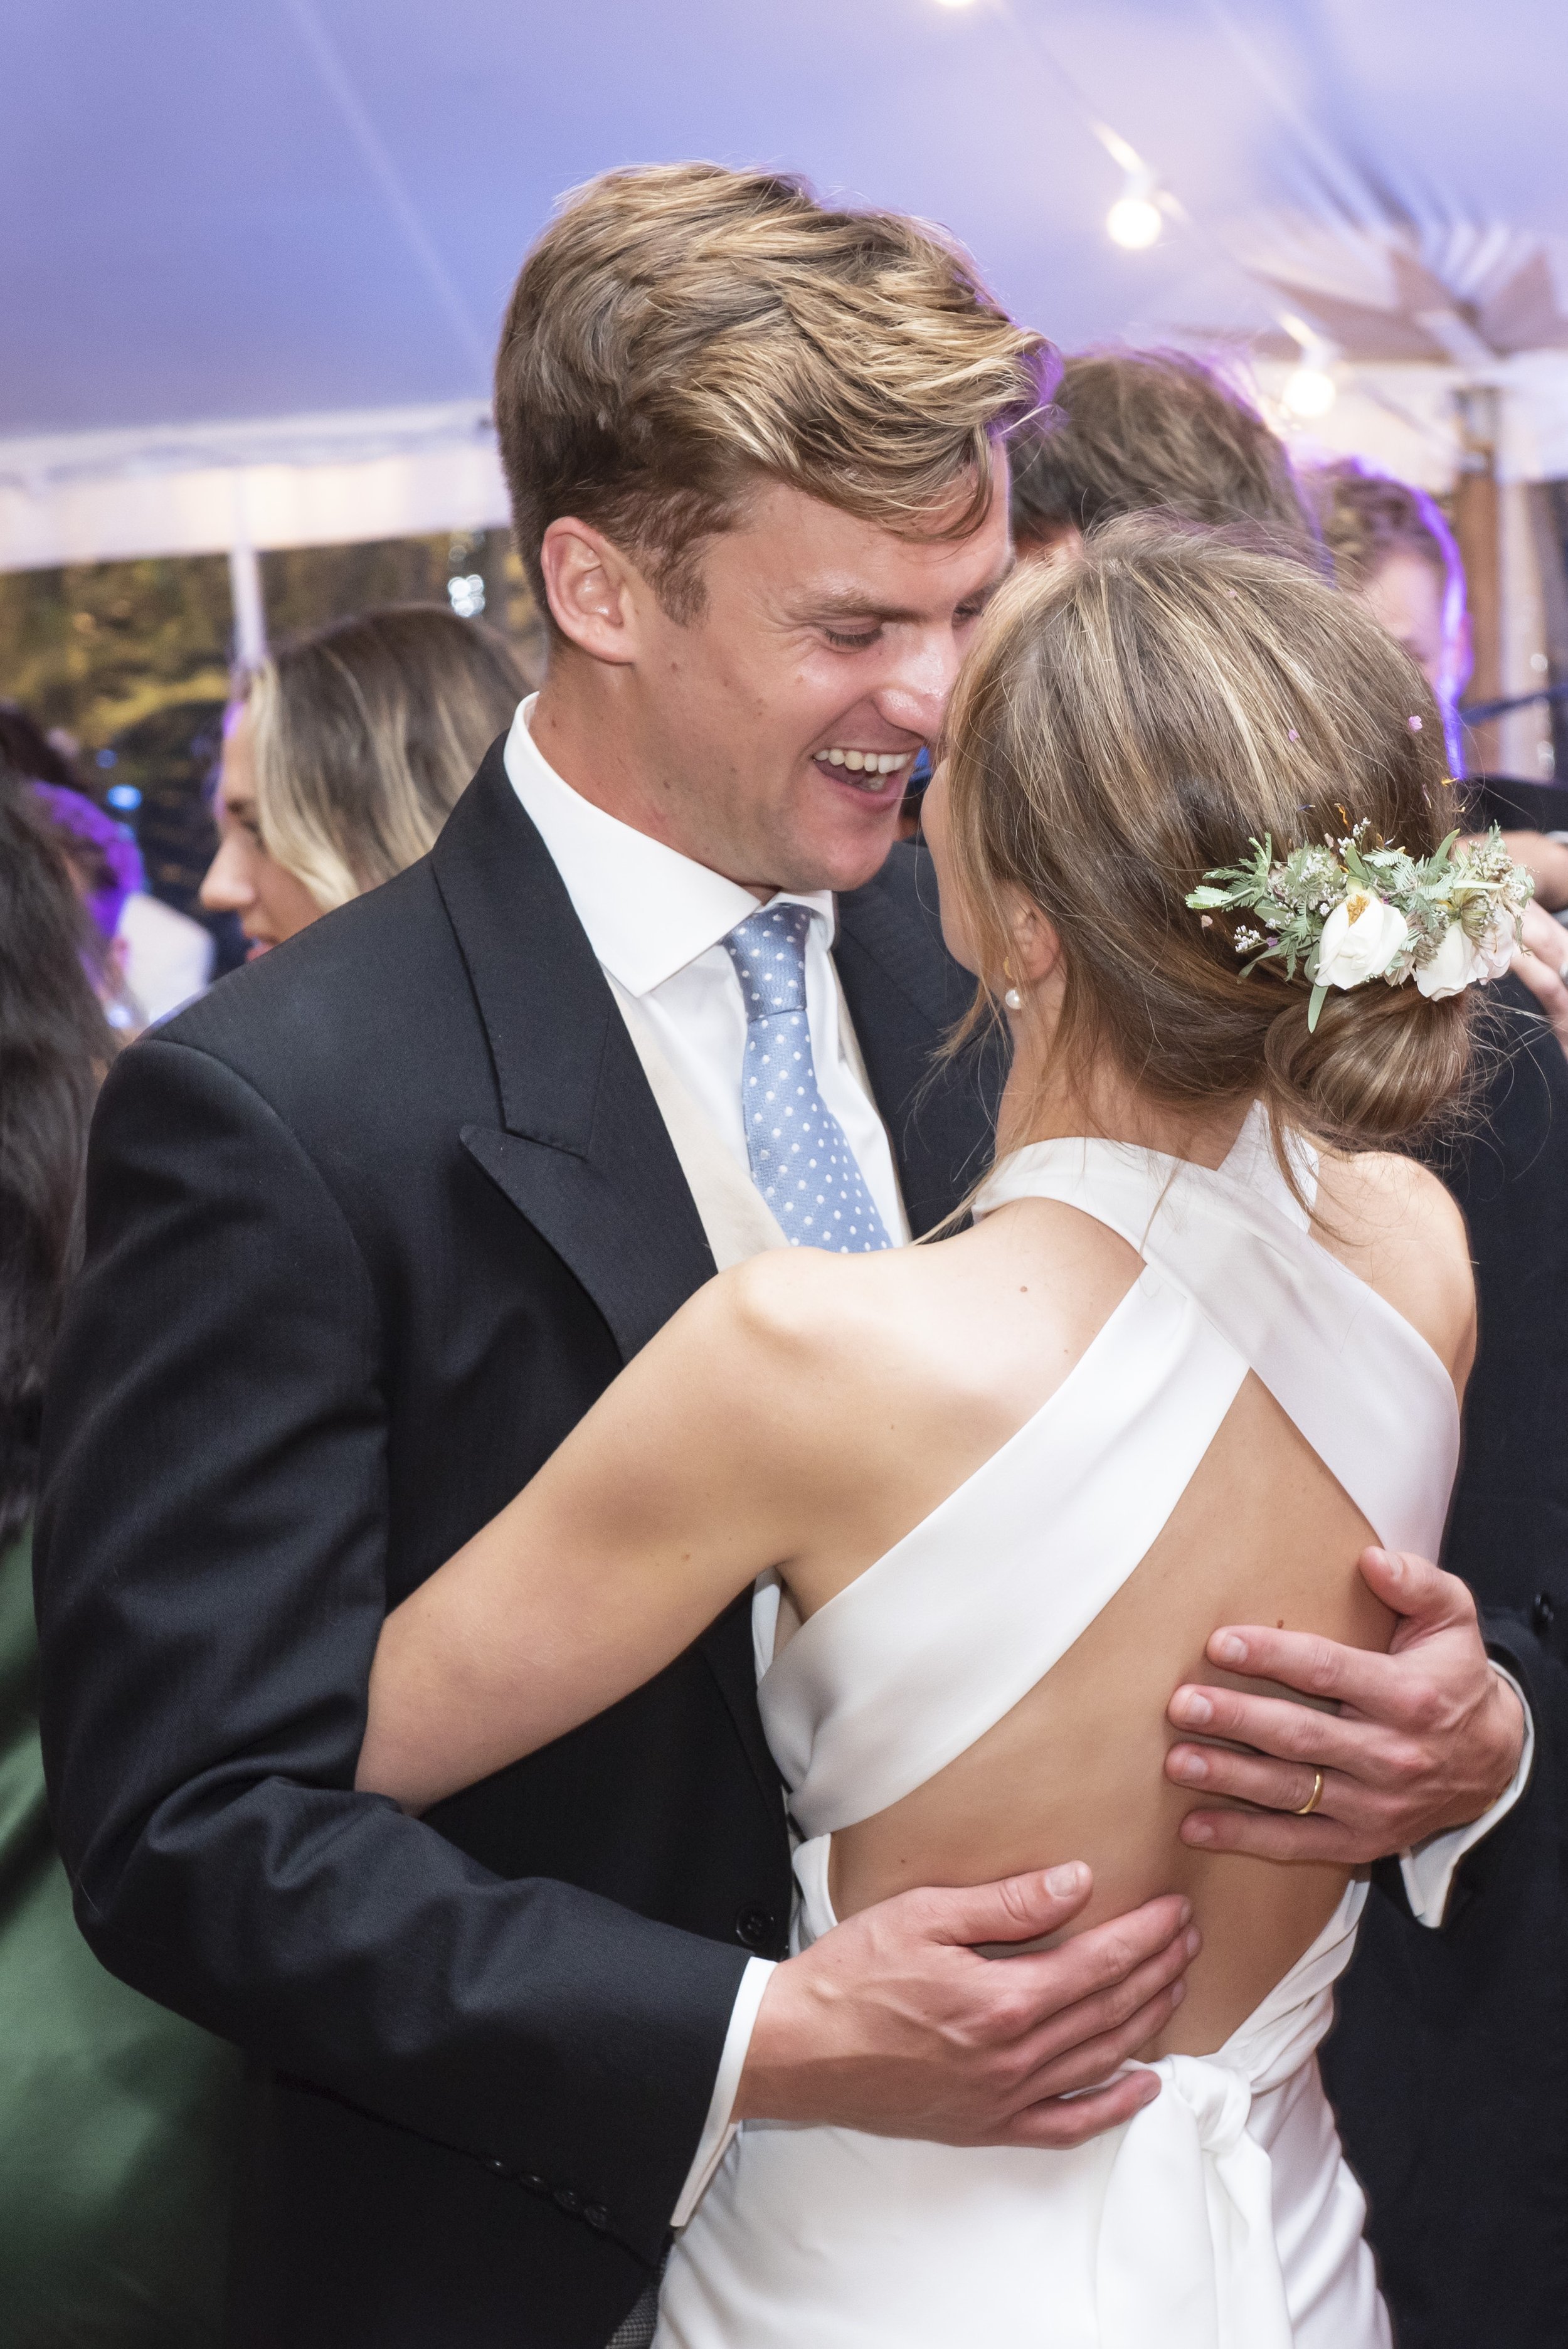 Beautiful bride Izzy wears the Cheryl dress with the Mayfair Skirt by Halfpenny London